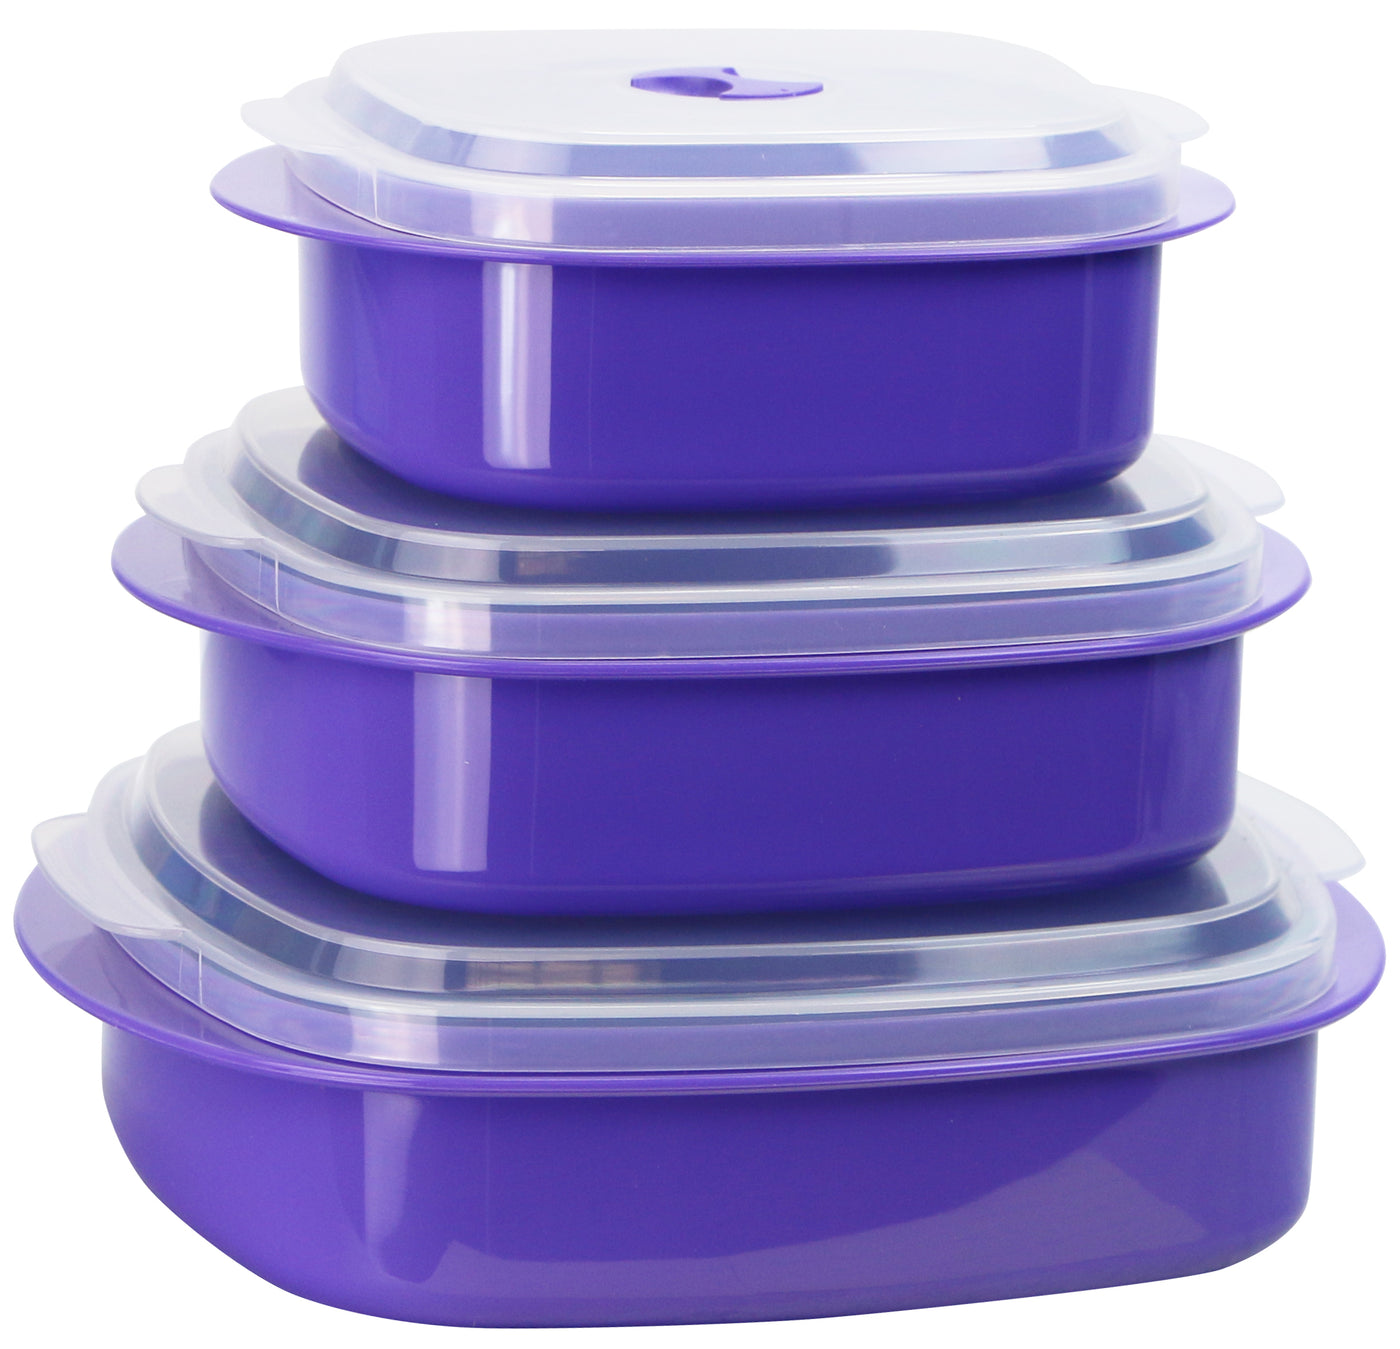 stack of 3 purple storage containers with lids on white background.